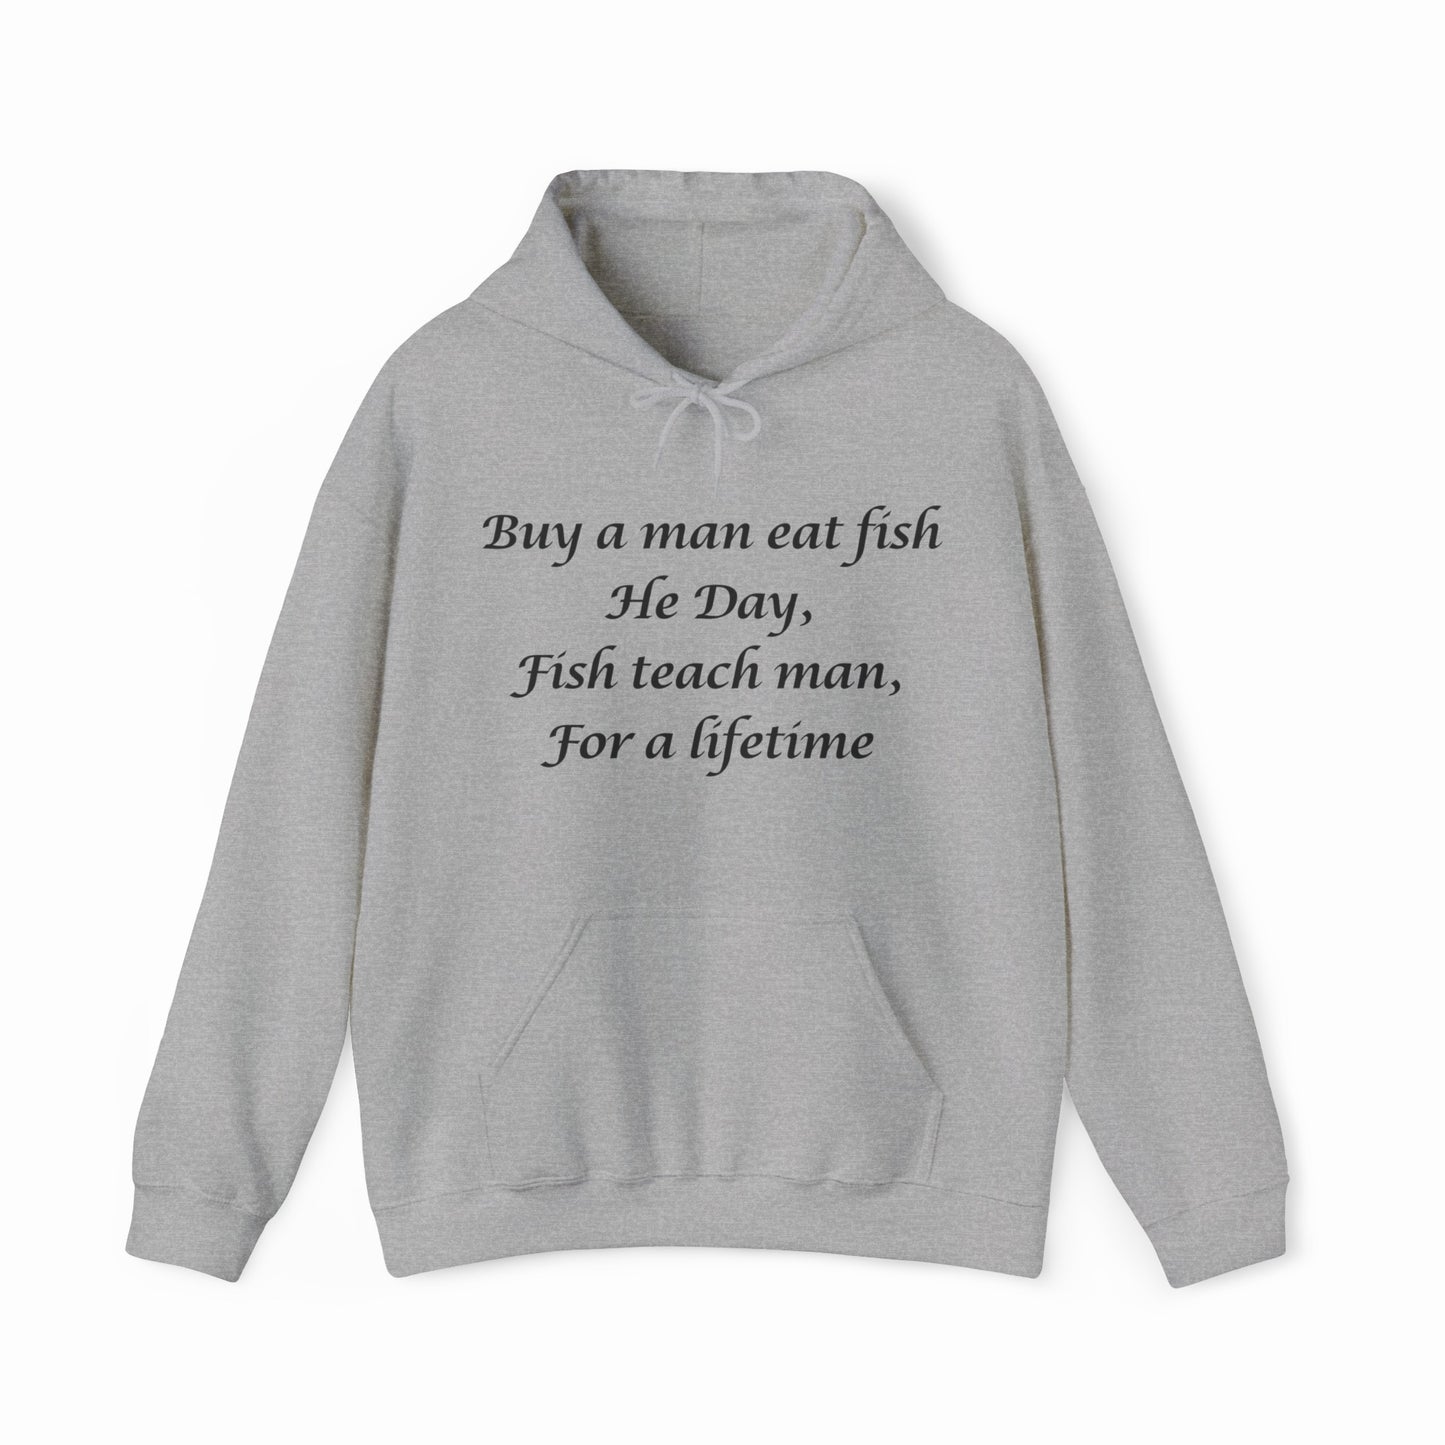 Buy A Man Eat Fish He Day, Fish Teach Man, For A Lifetime Hoodie